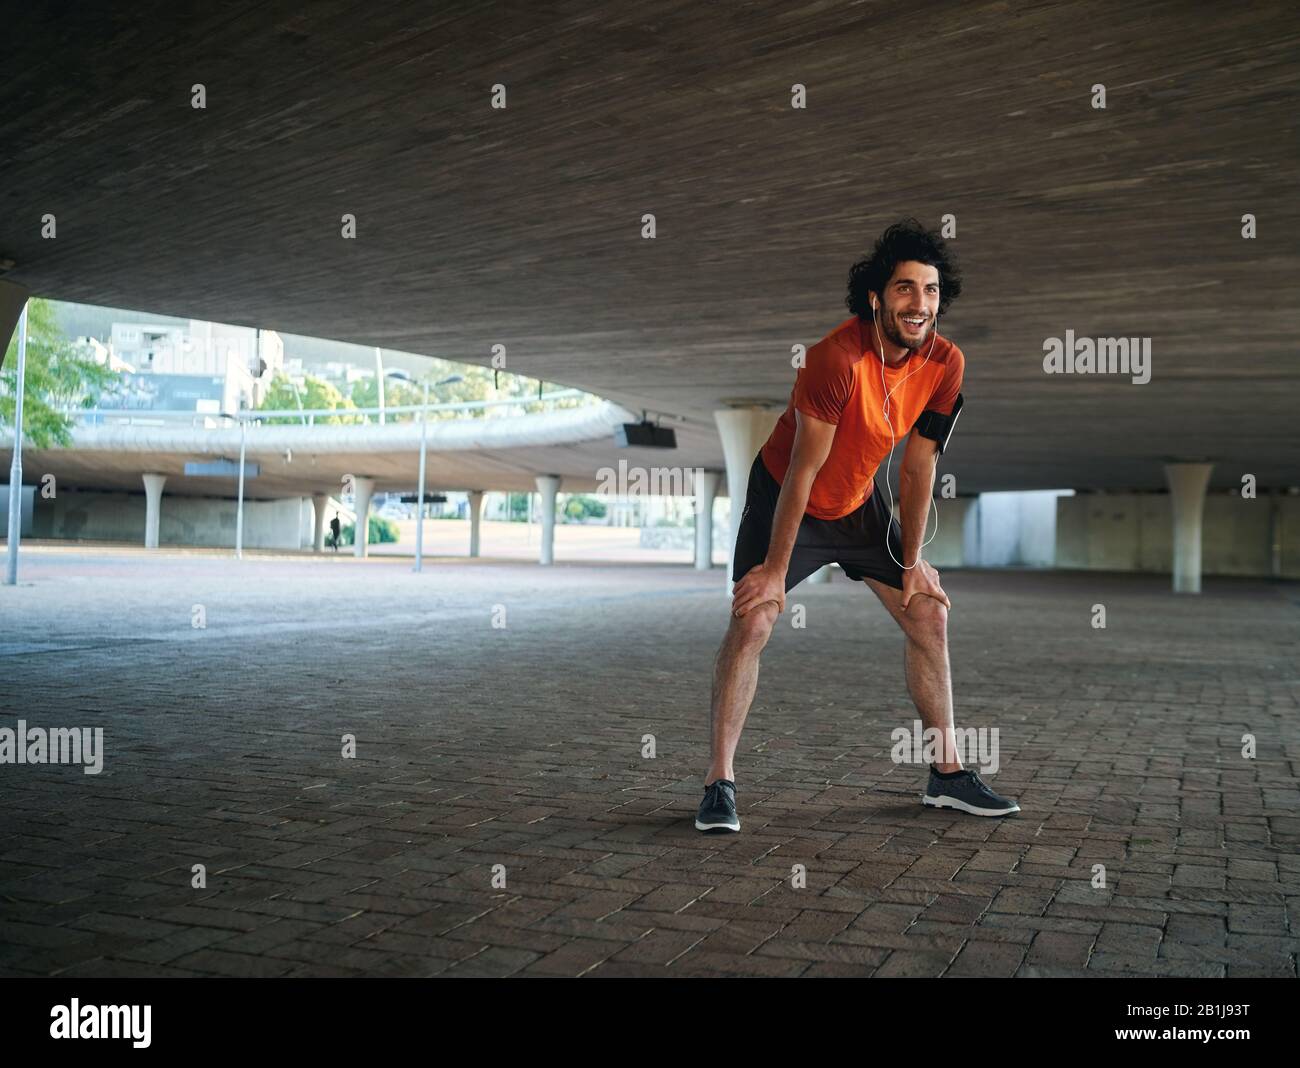 Portrait of young attractive tired man exhausted after outdoors running workout on city street under the concrete bridge - new year new you Stock Photo